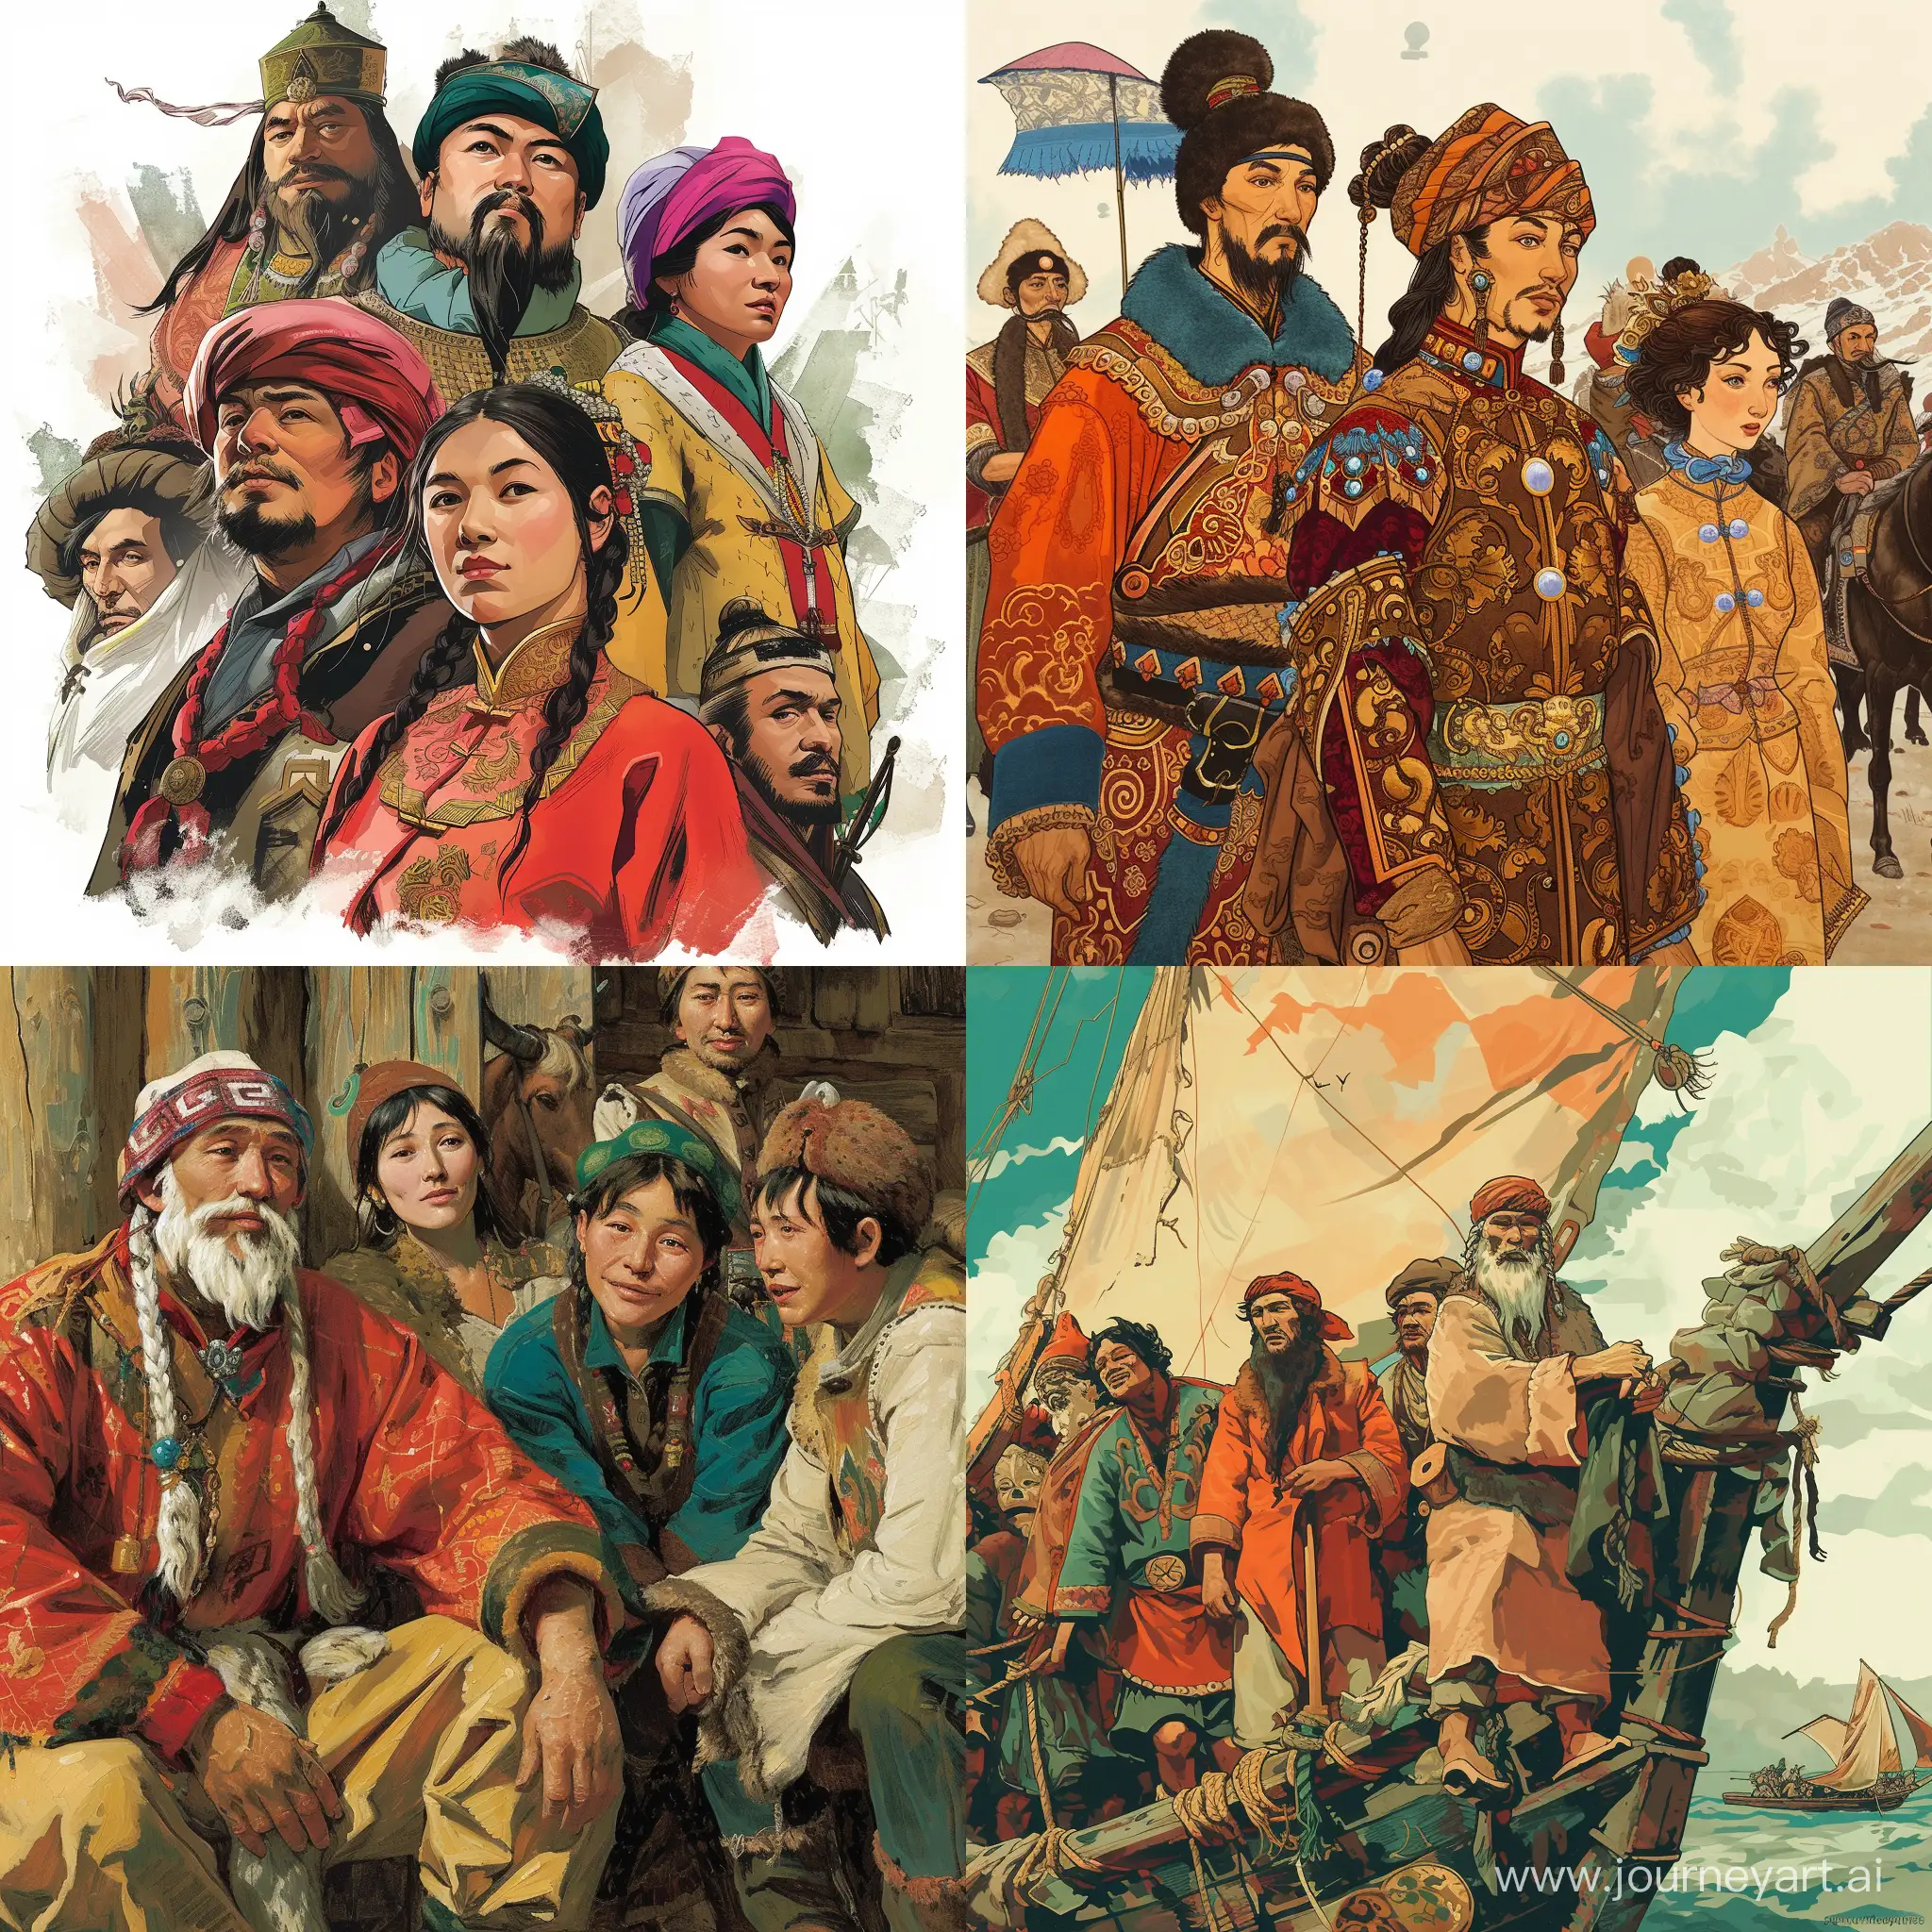 Contemporary-Illustration-of-Russian-People-in-Far-East-Tales